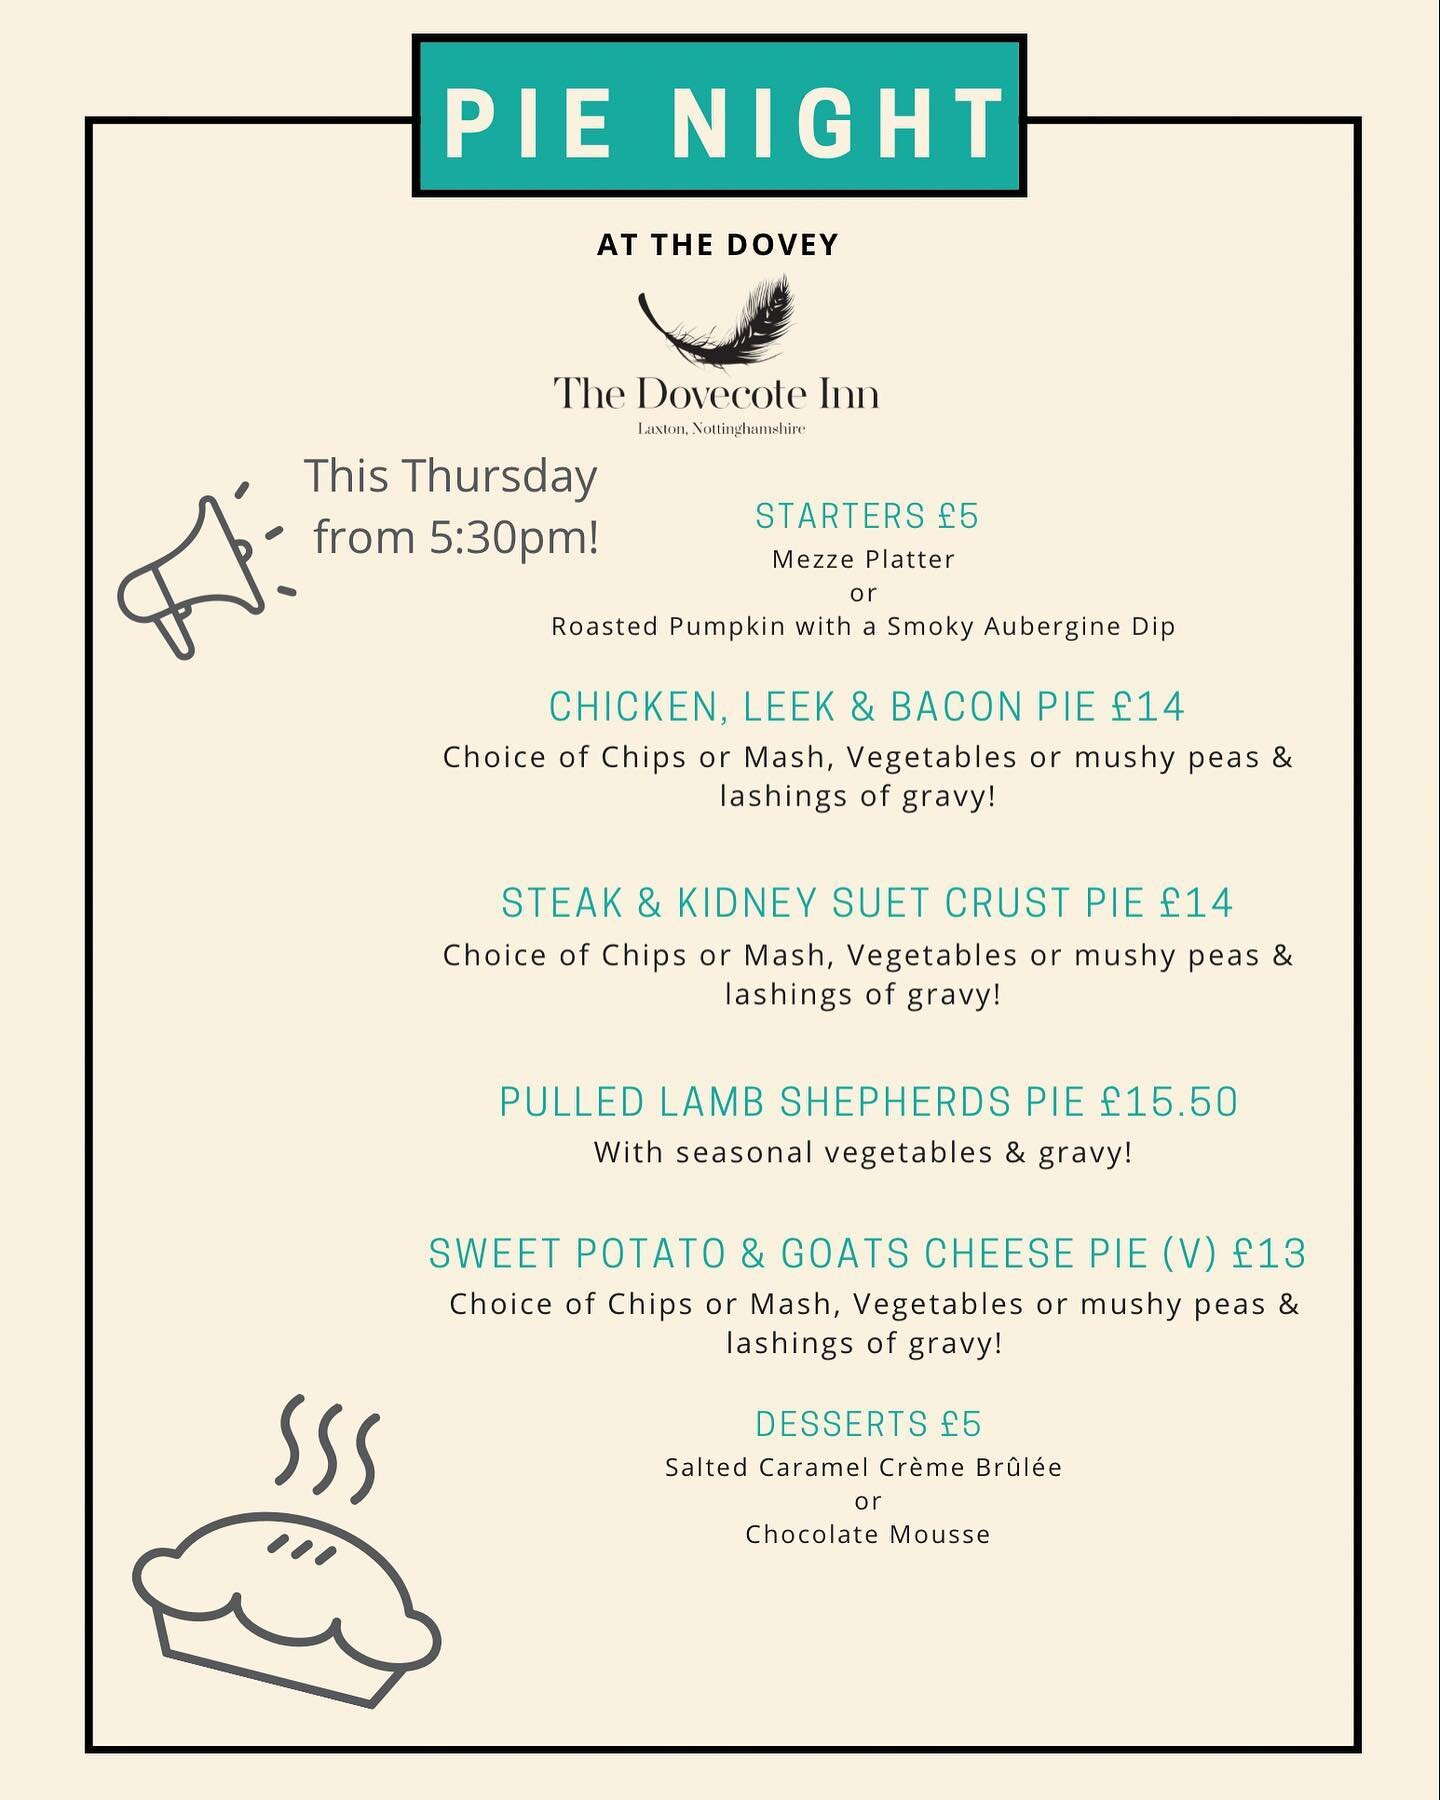 Pie Night is this Thursday evening from 5:30pm! Book your table and join us for one of our famous homemade pies 🥧😛😆